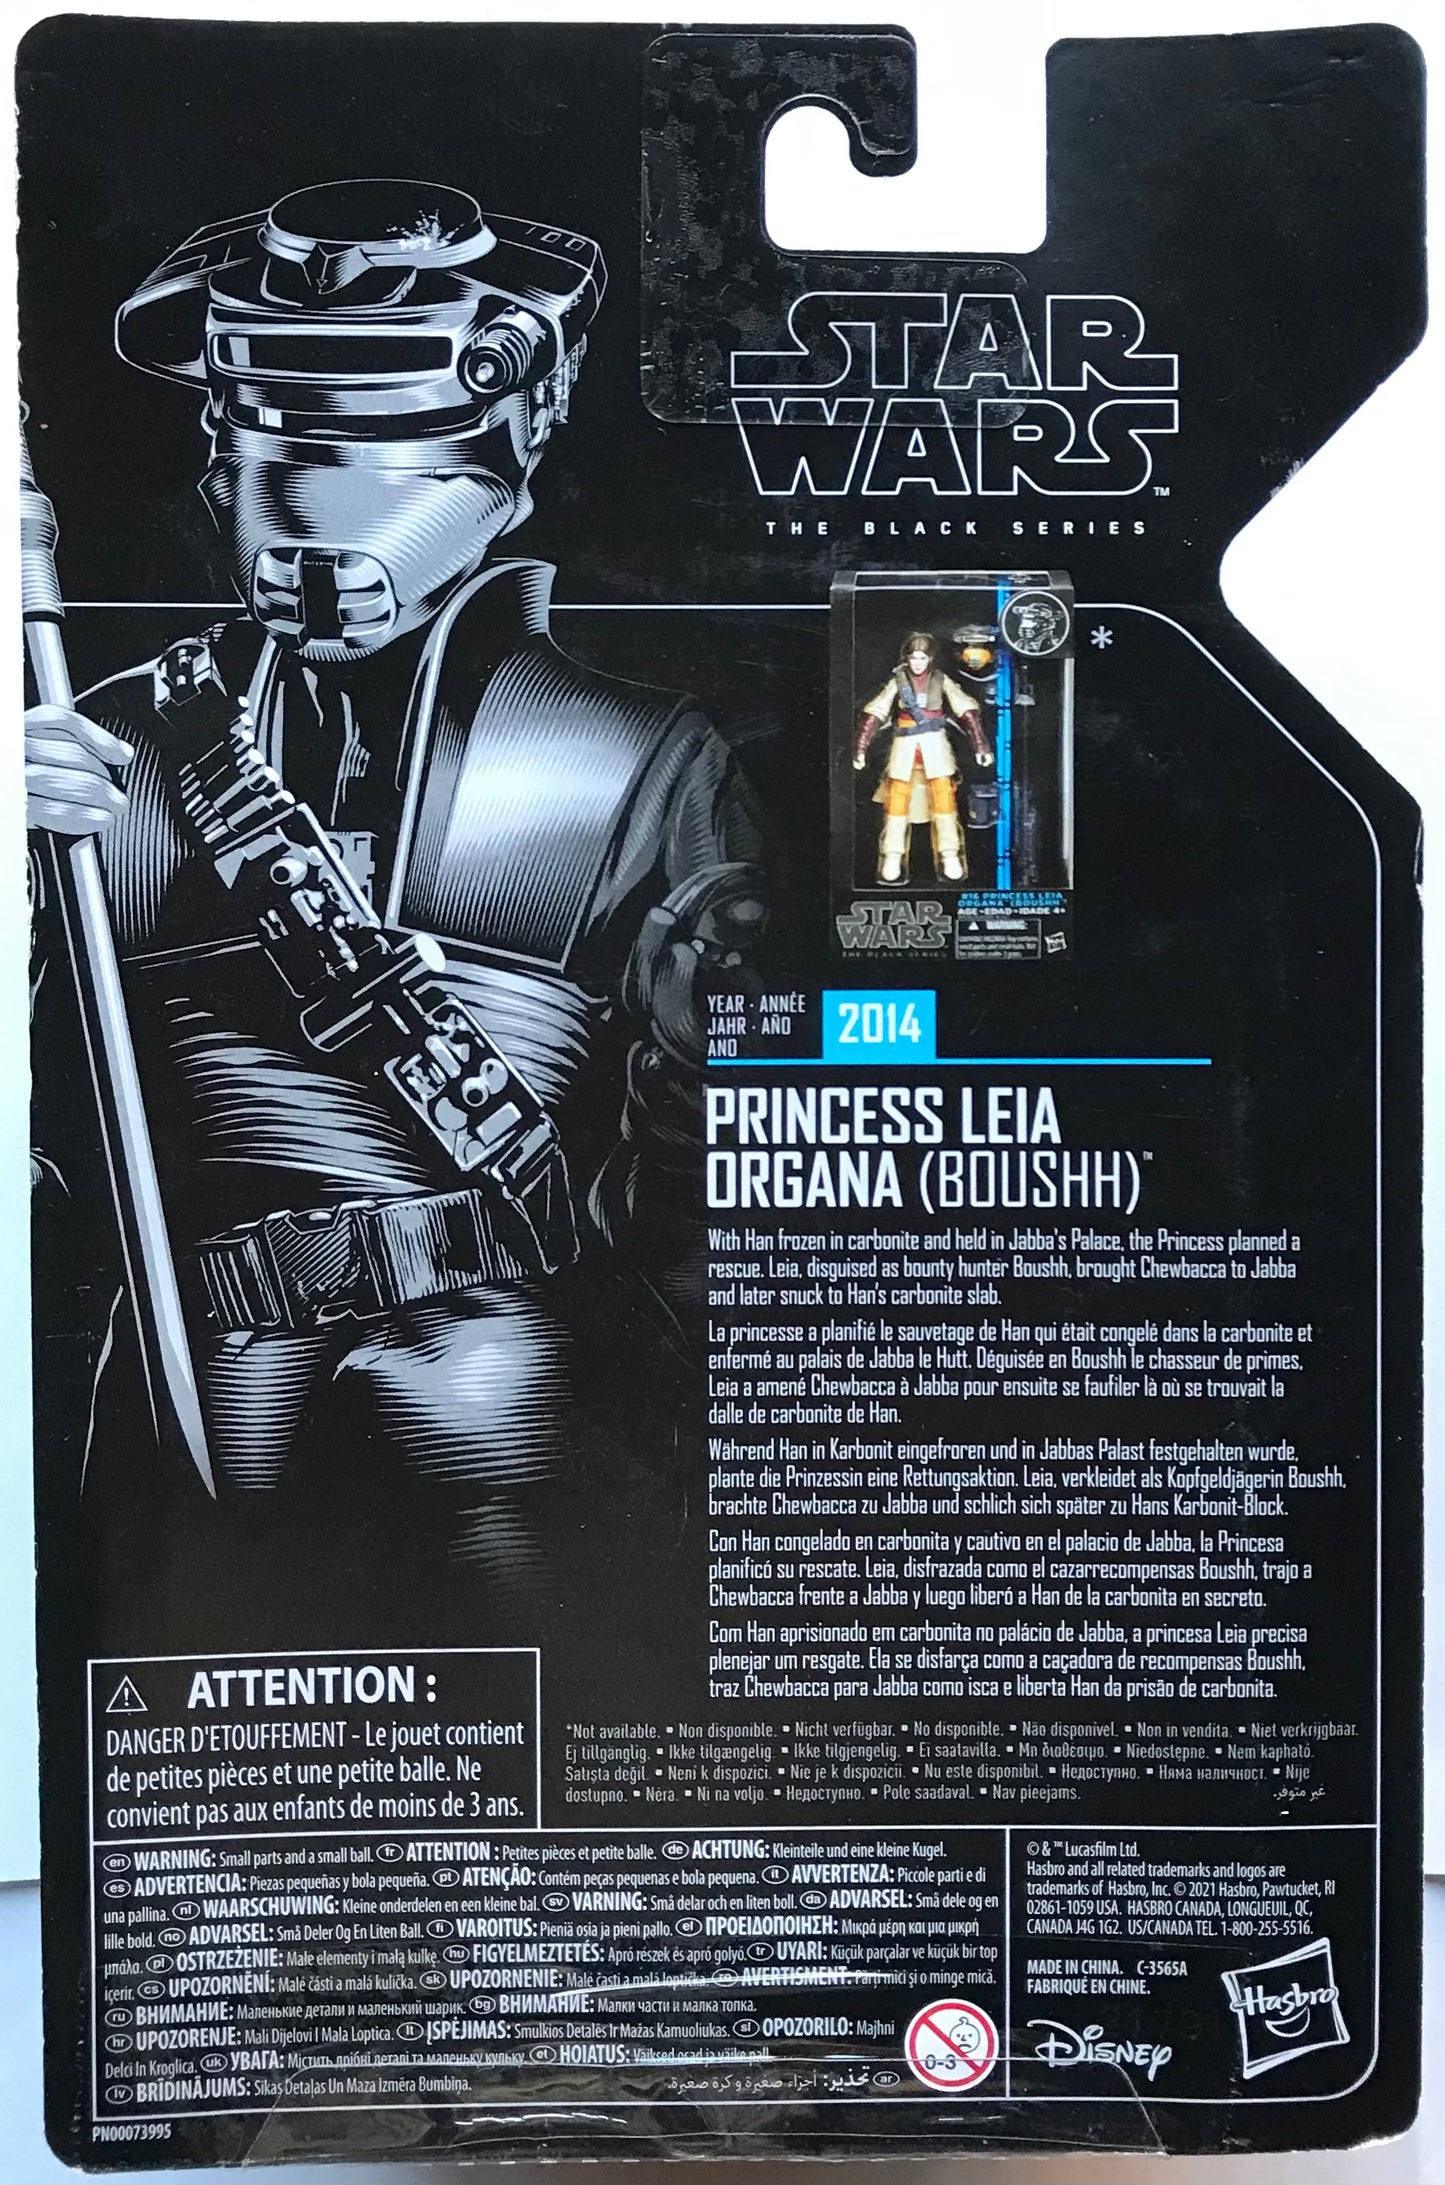 The Black Series Star Wars Archive Princess Leia Organa (Boushh) 6-Inch Action Figure